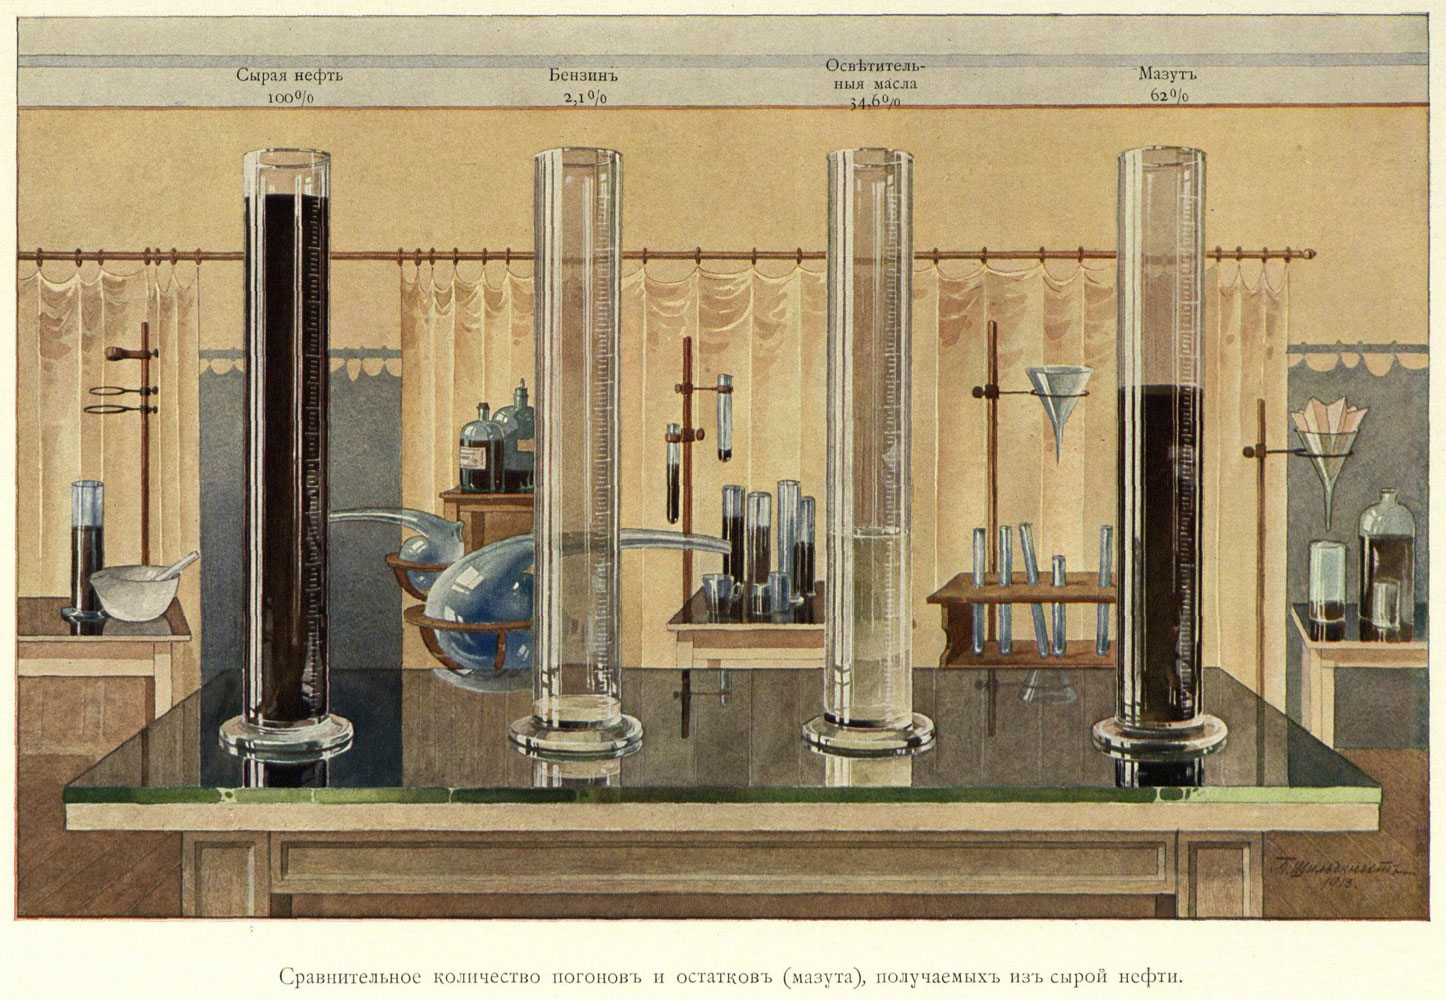 The laboratory tests as well as comparison of residues from the crude oil refining: Crude, Gasoline, Kerosene and Masut.